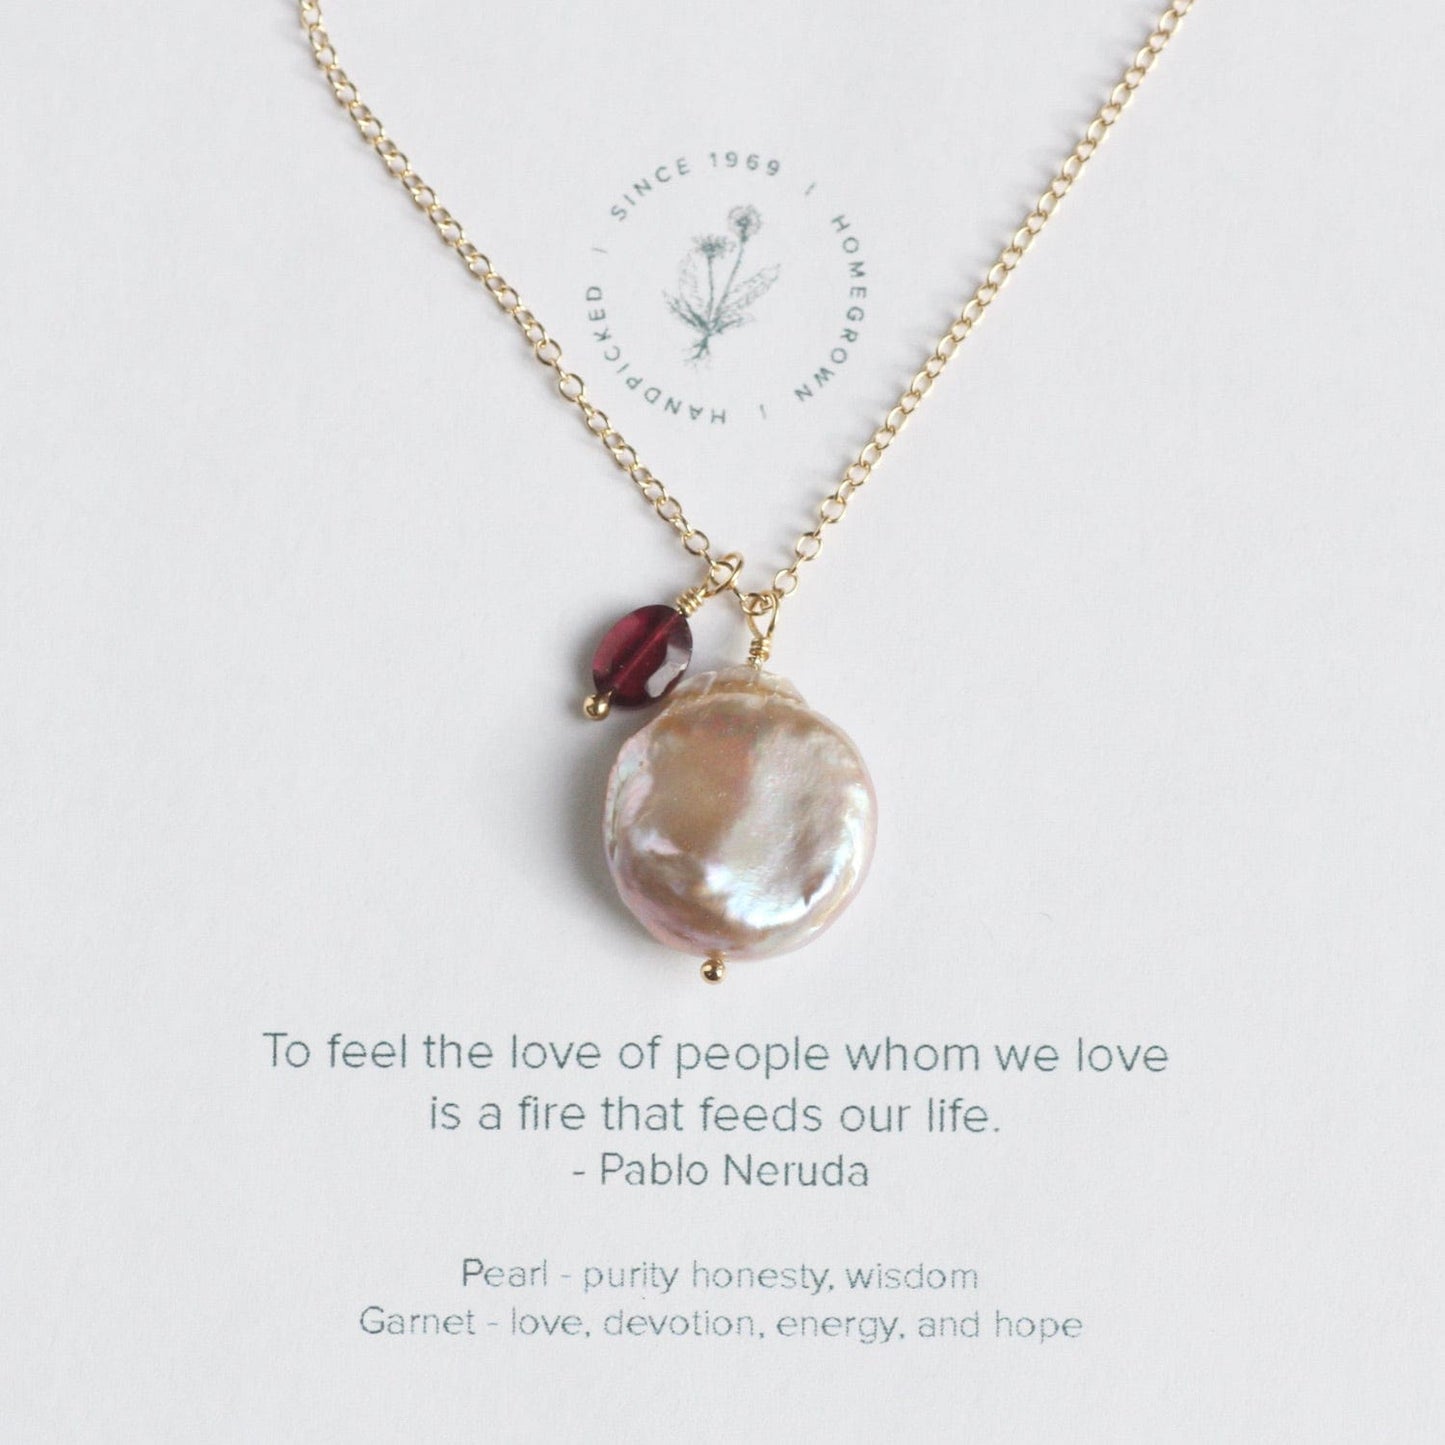 Load image into Gallery viewer, NKL To Feel the Love Necklace - Pablo Neruda
